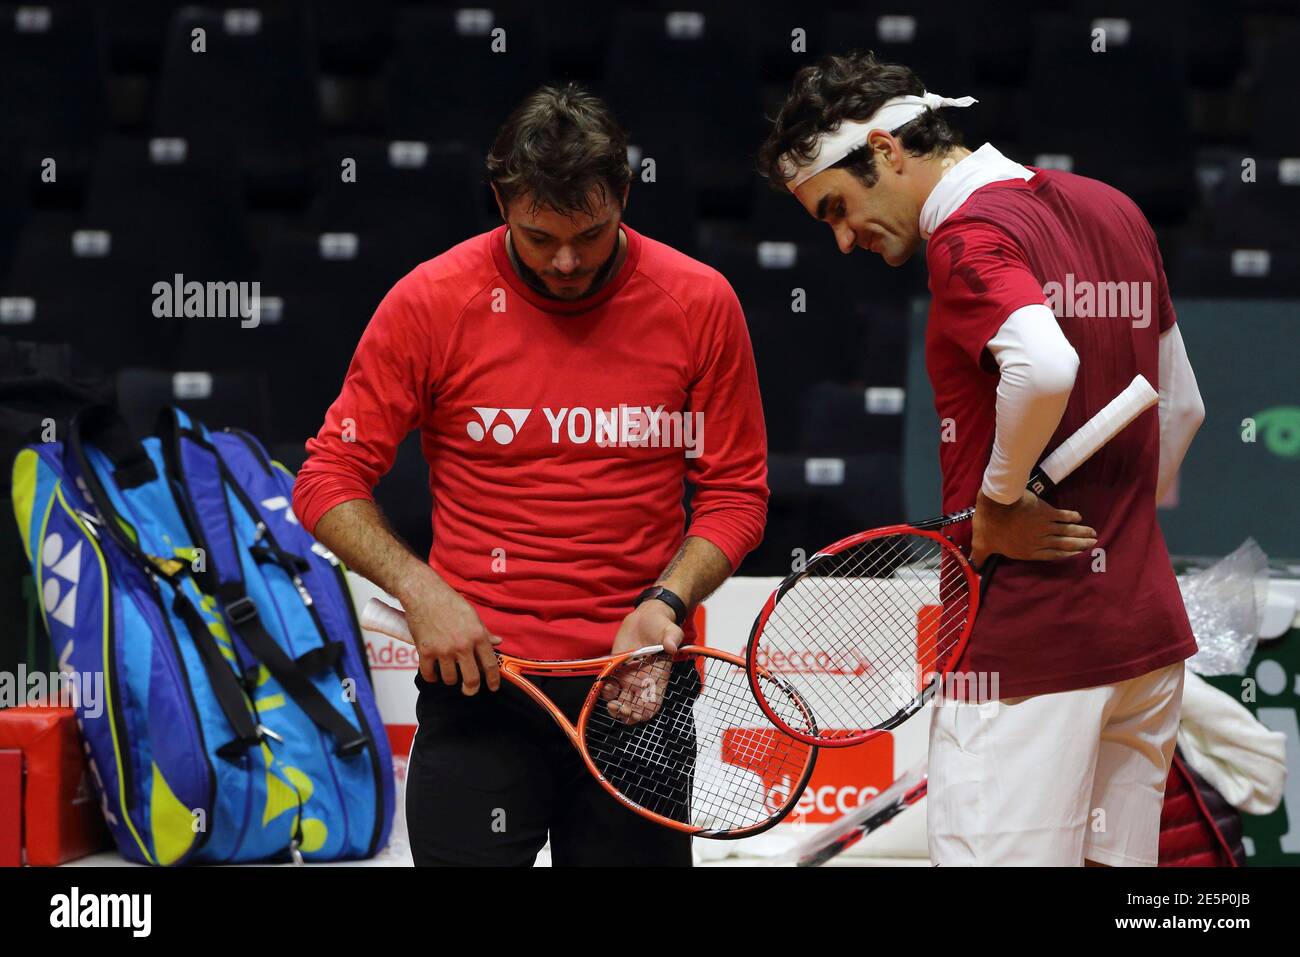 Roger Federer (R) and Stanislas Wawrinka of Switzerland attend a Davis Cup  tennis training session at the Pierre Mauroy stadium in Villeneuve d'Ascq,  northern France, November 20, 2014. France will face Switzerland